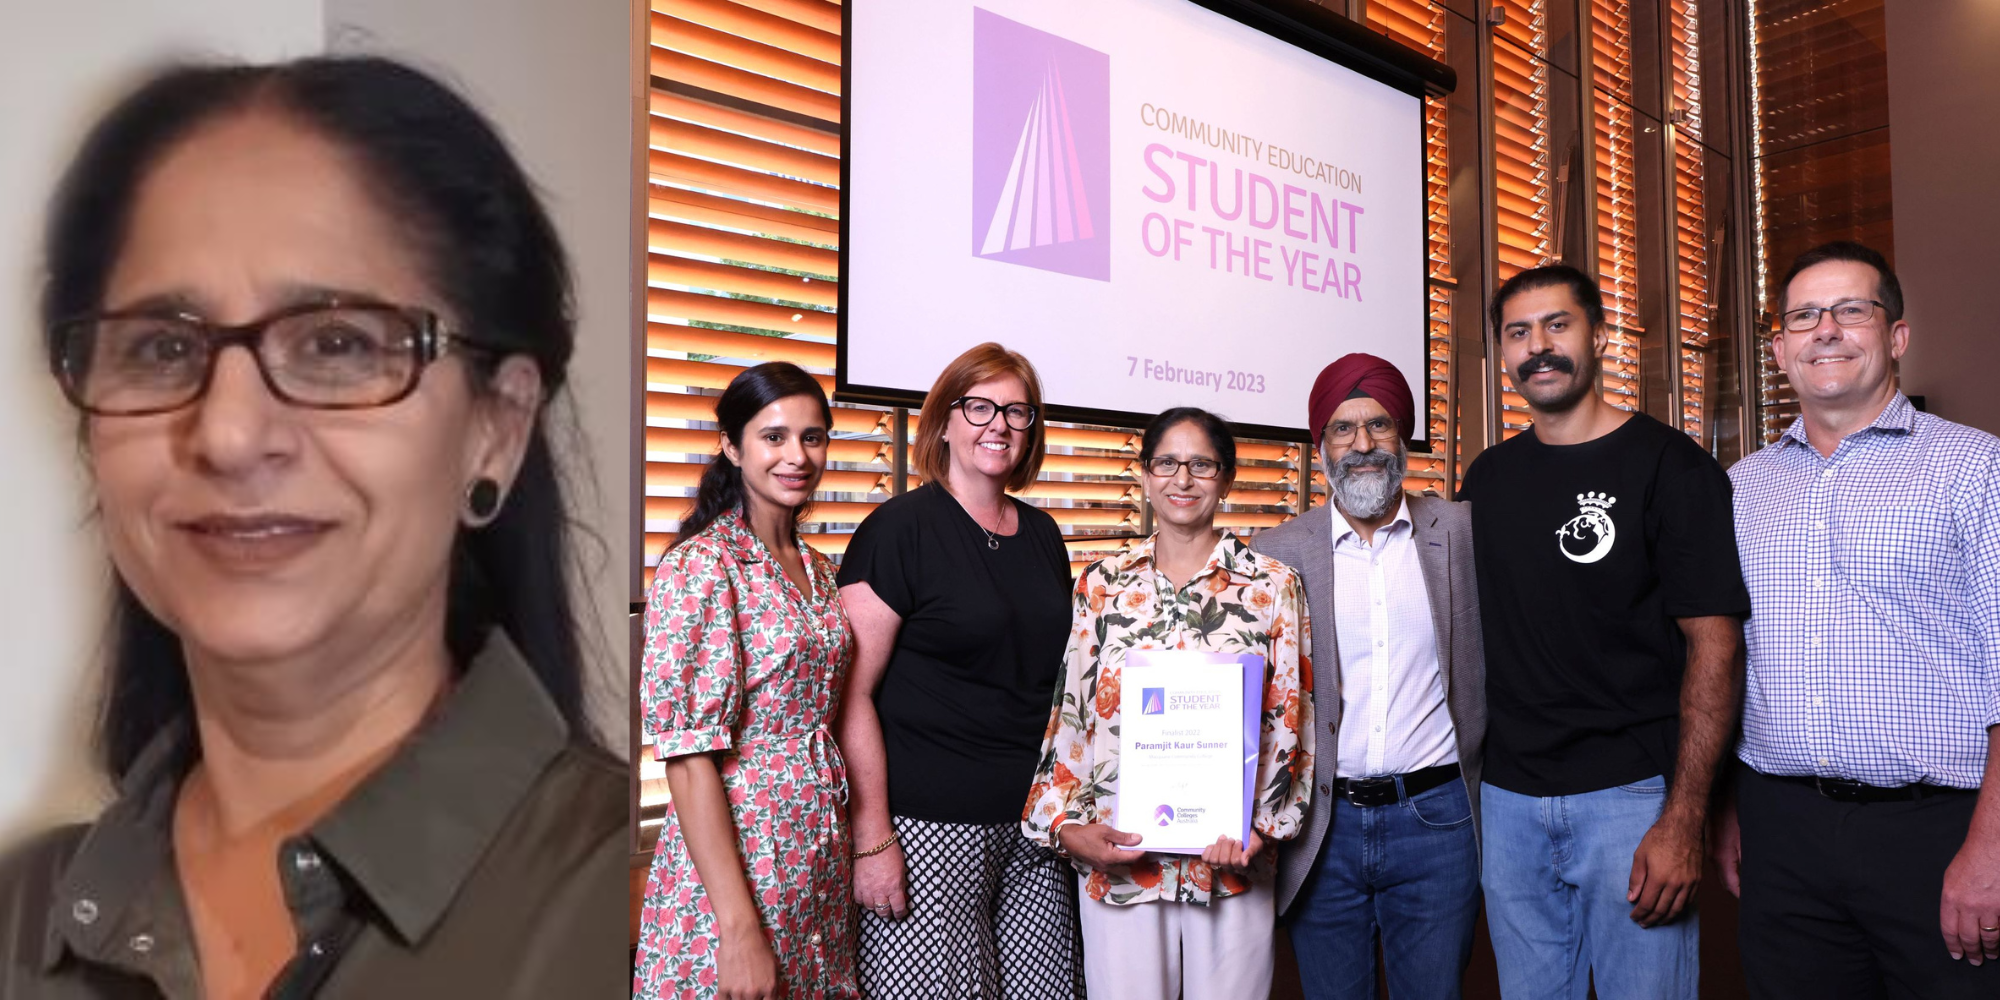 Meet Pam - Our Finalist for the Community Education Student of the Year Awards 2022